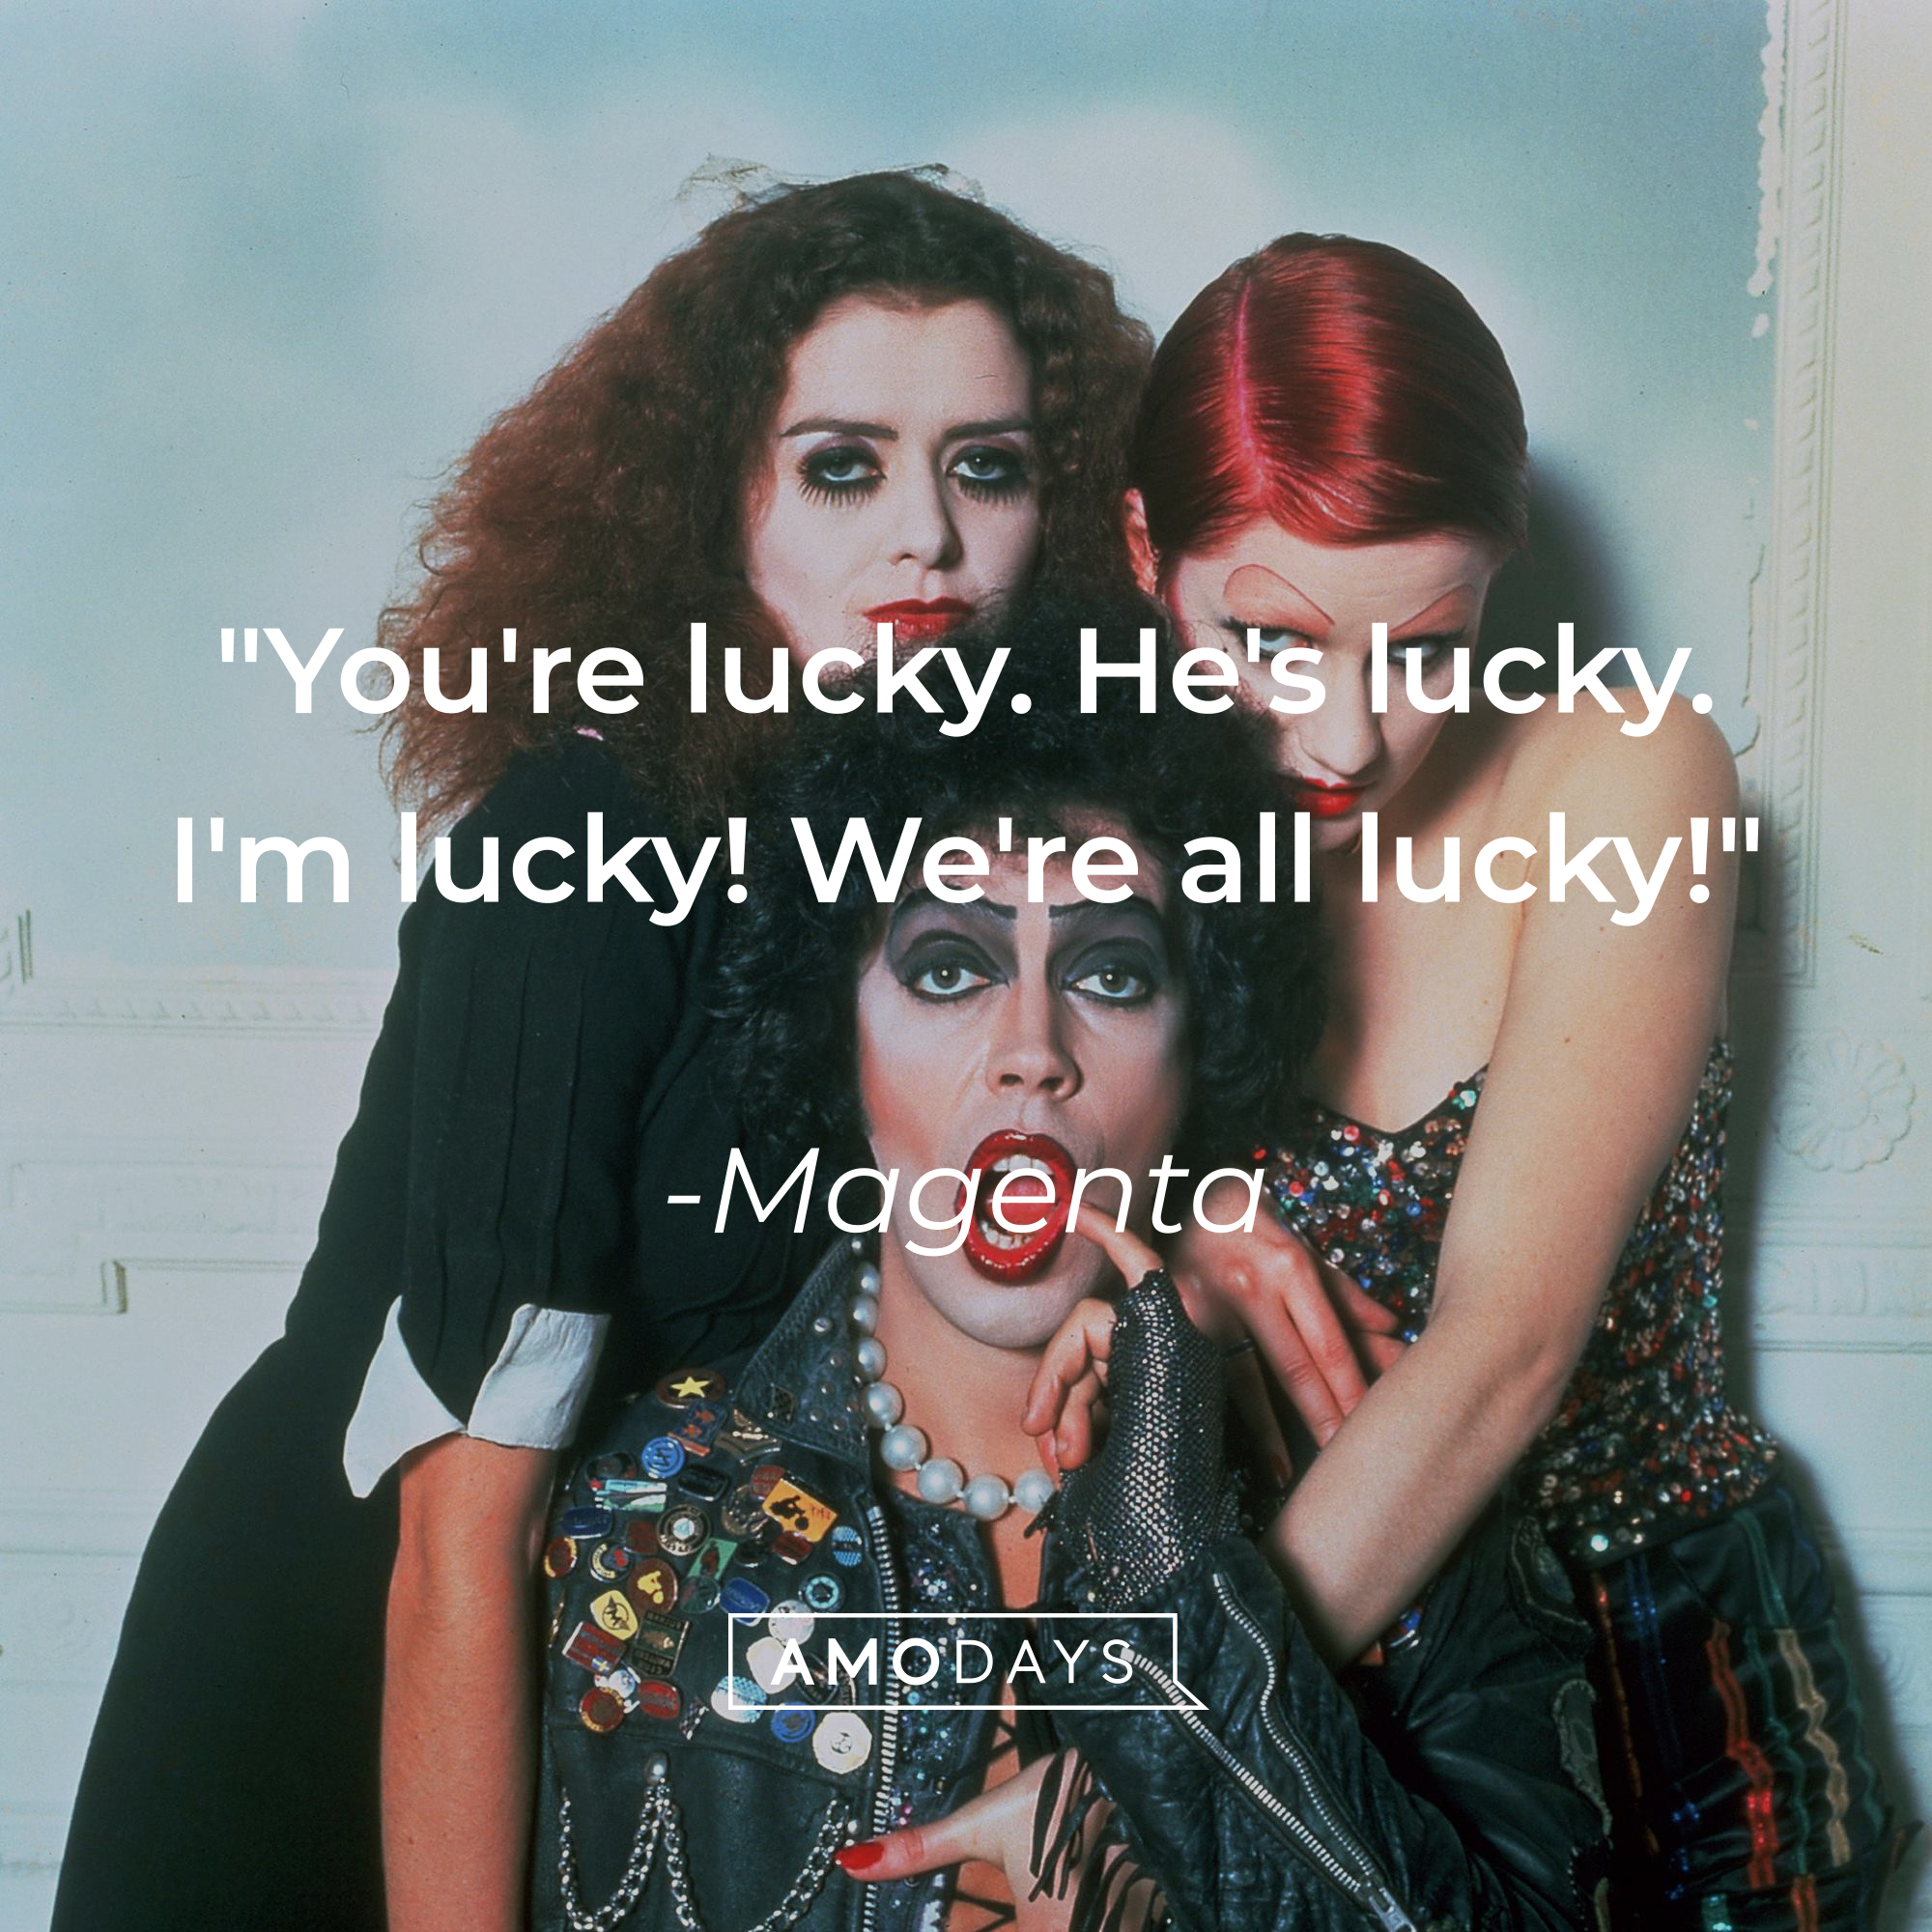 Magneta's quote: "You're lucky. He's lucky. I'm lucky! We're all lucky!"  | Source: Facebook/TheRockyHorrorPictureShowOfficial